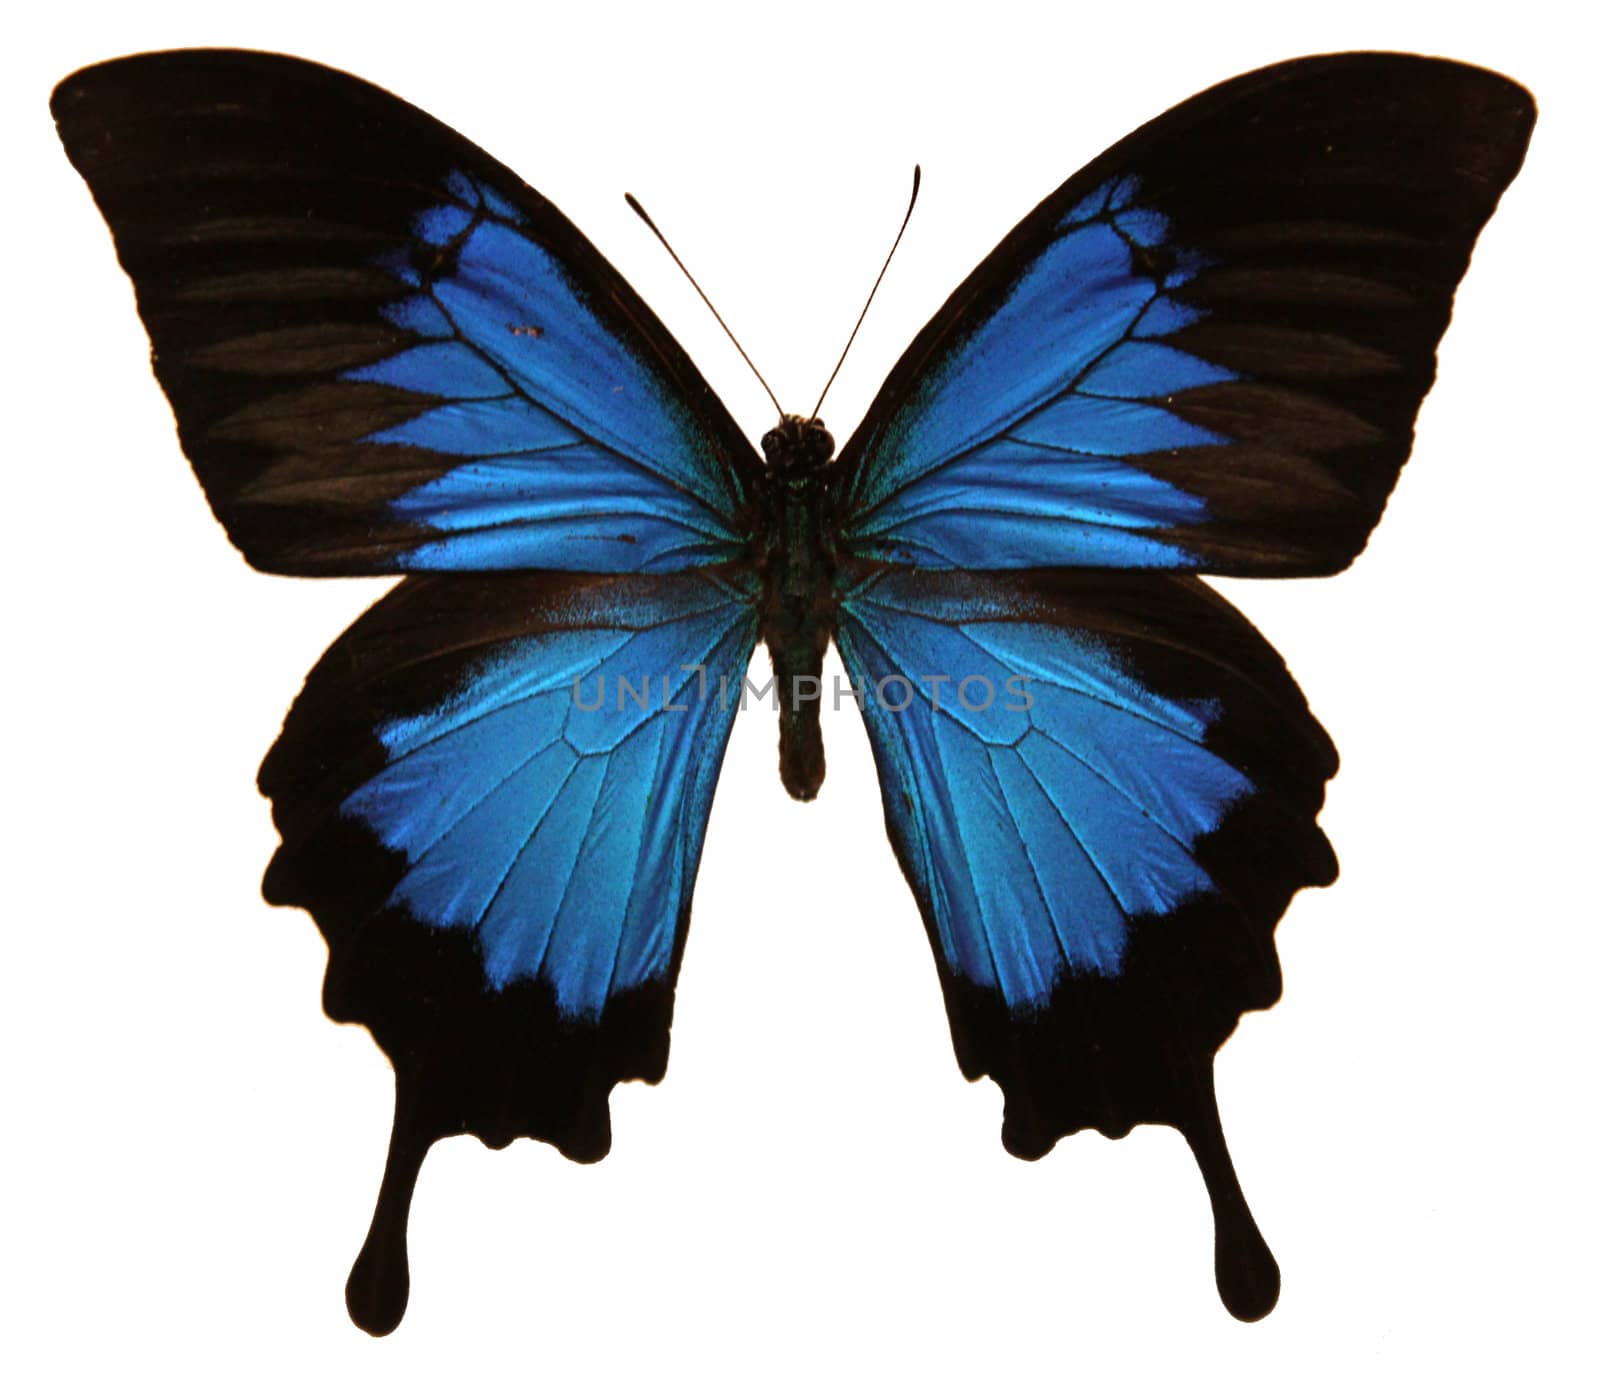 An isolated shot of a Papilio Ulysses butterfly.